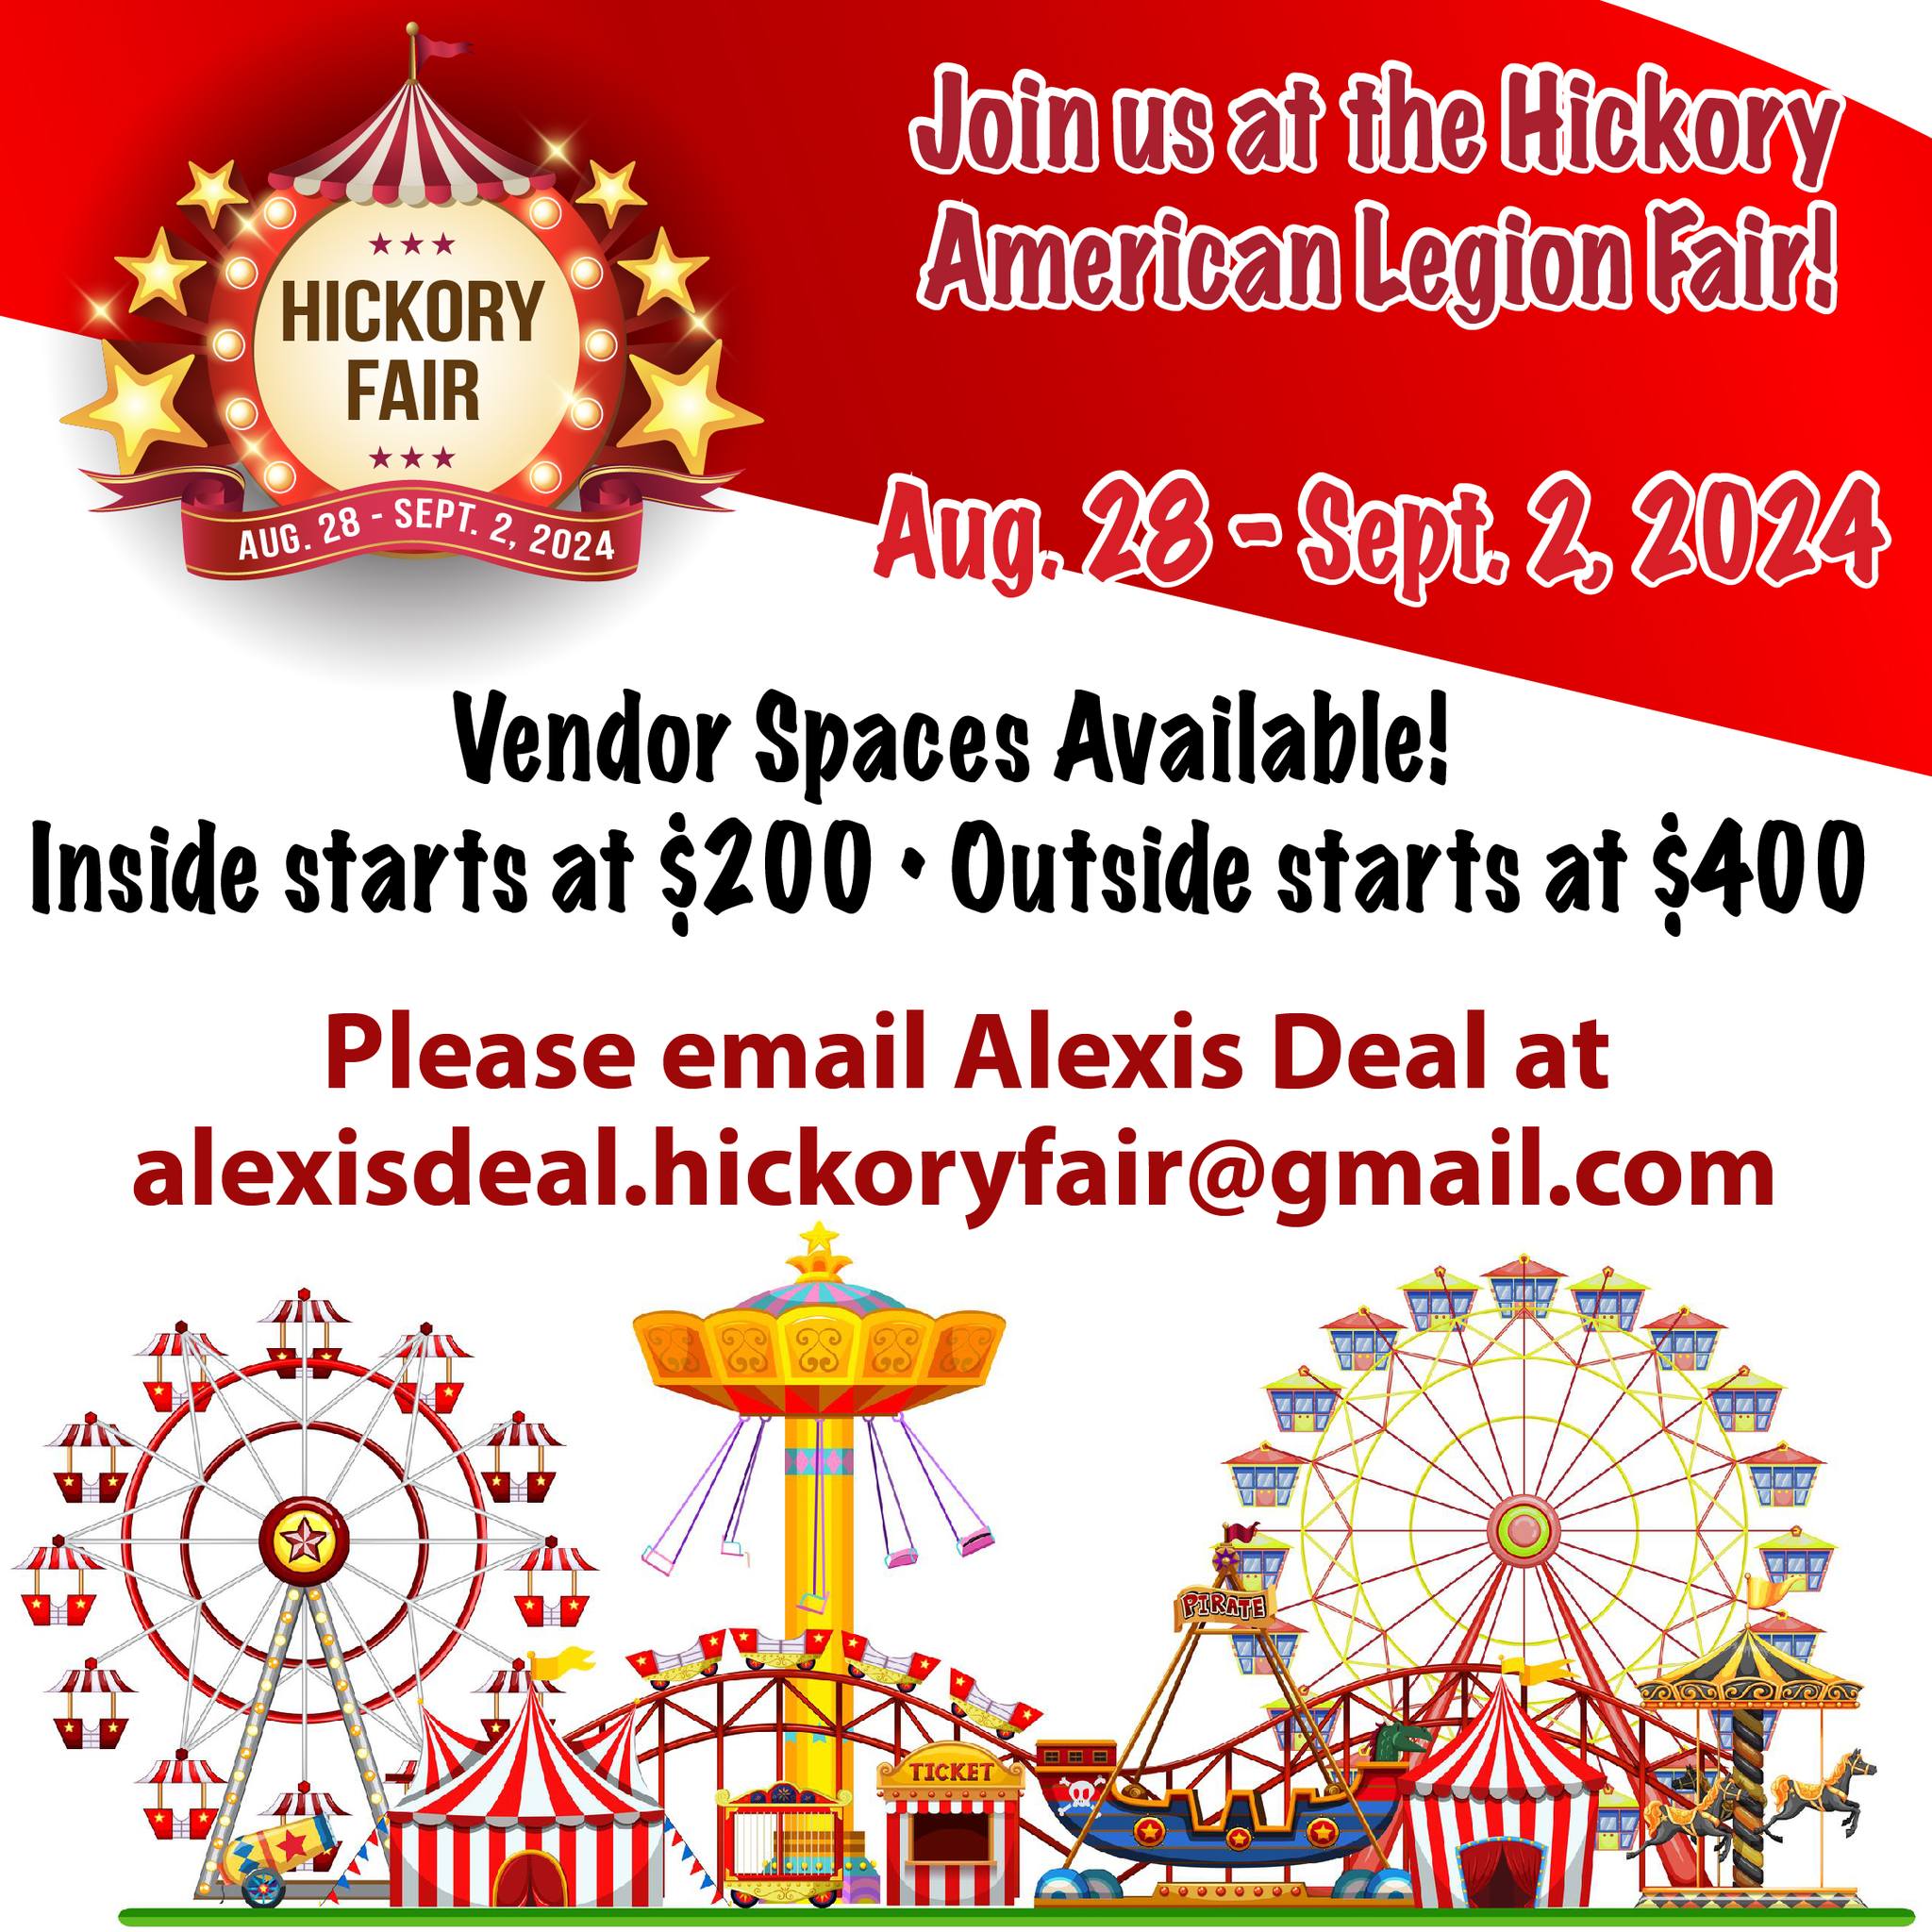 Vendor Spaces Available